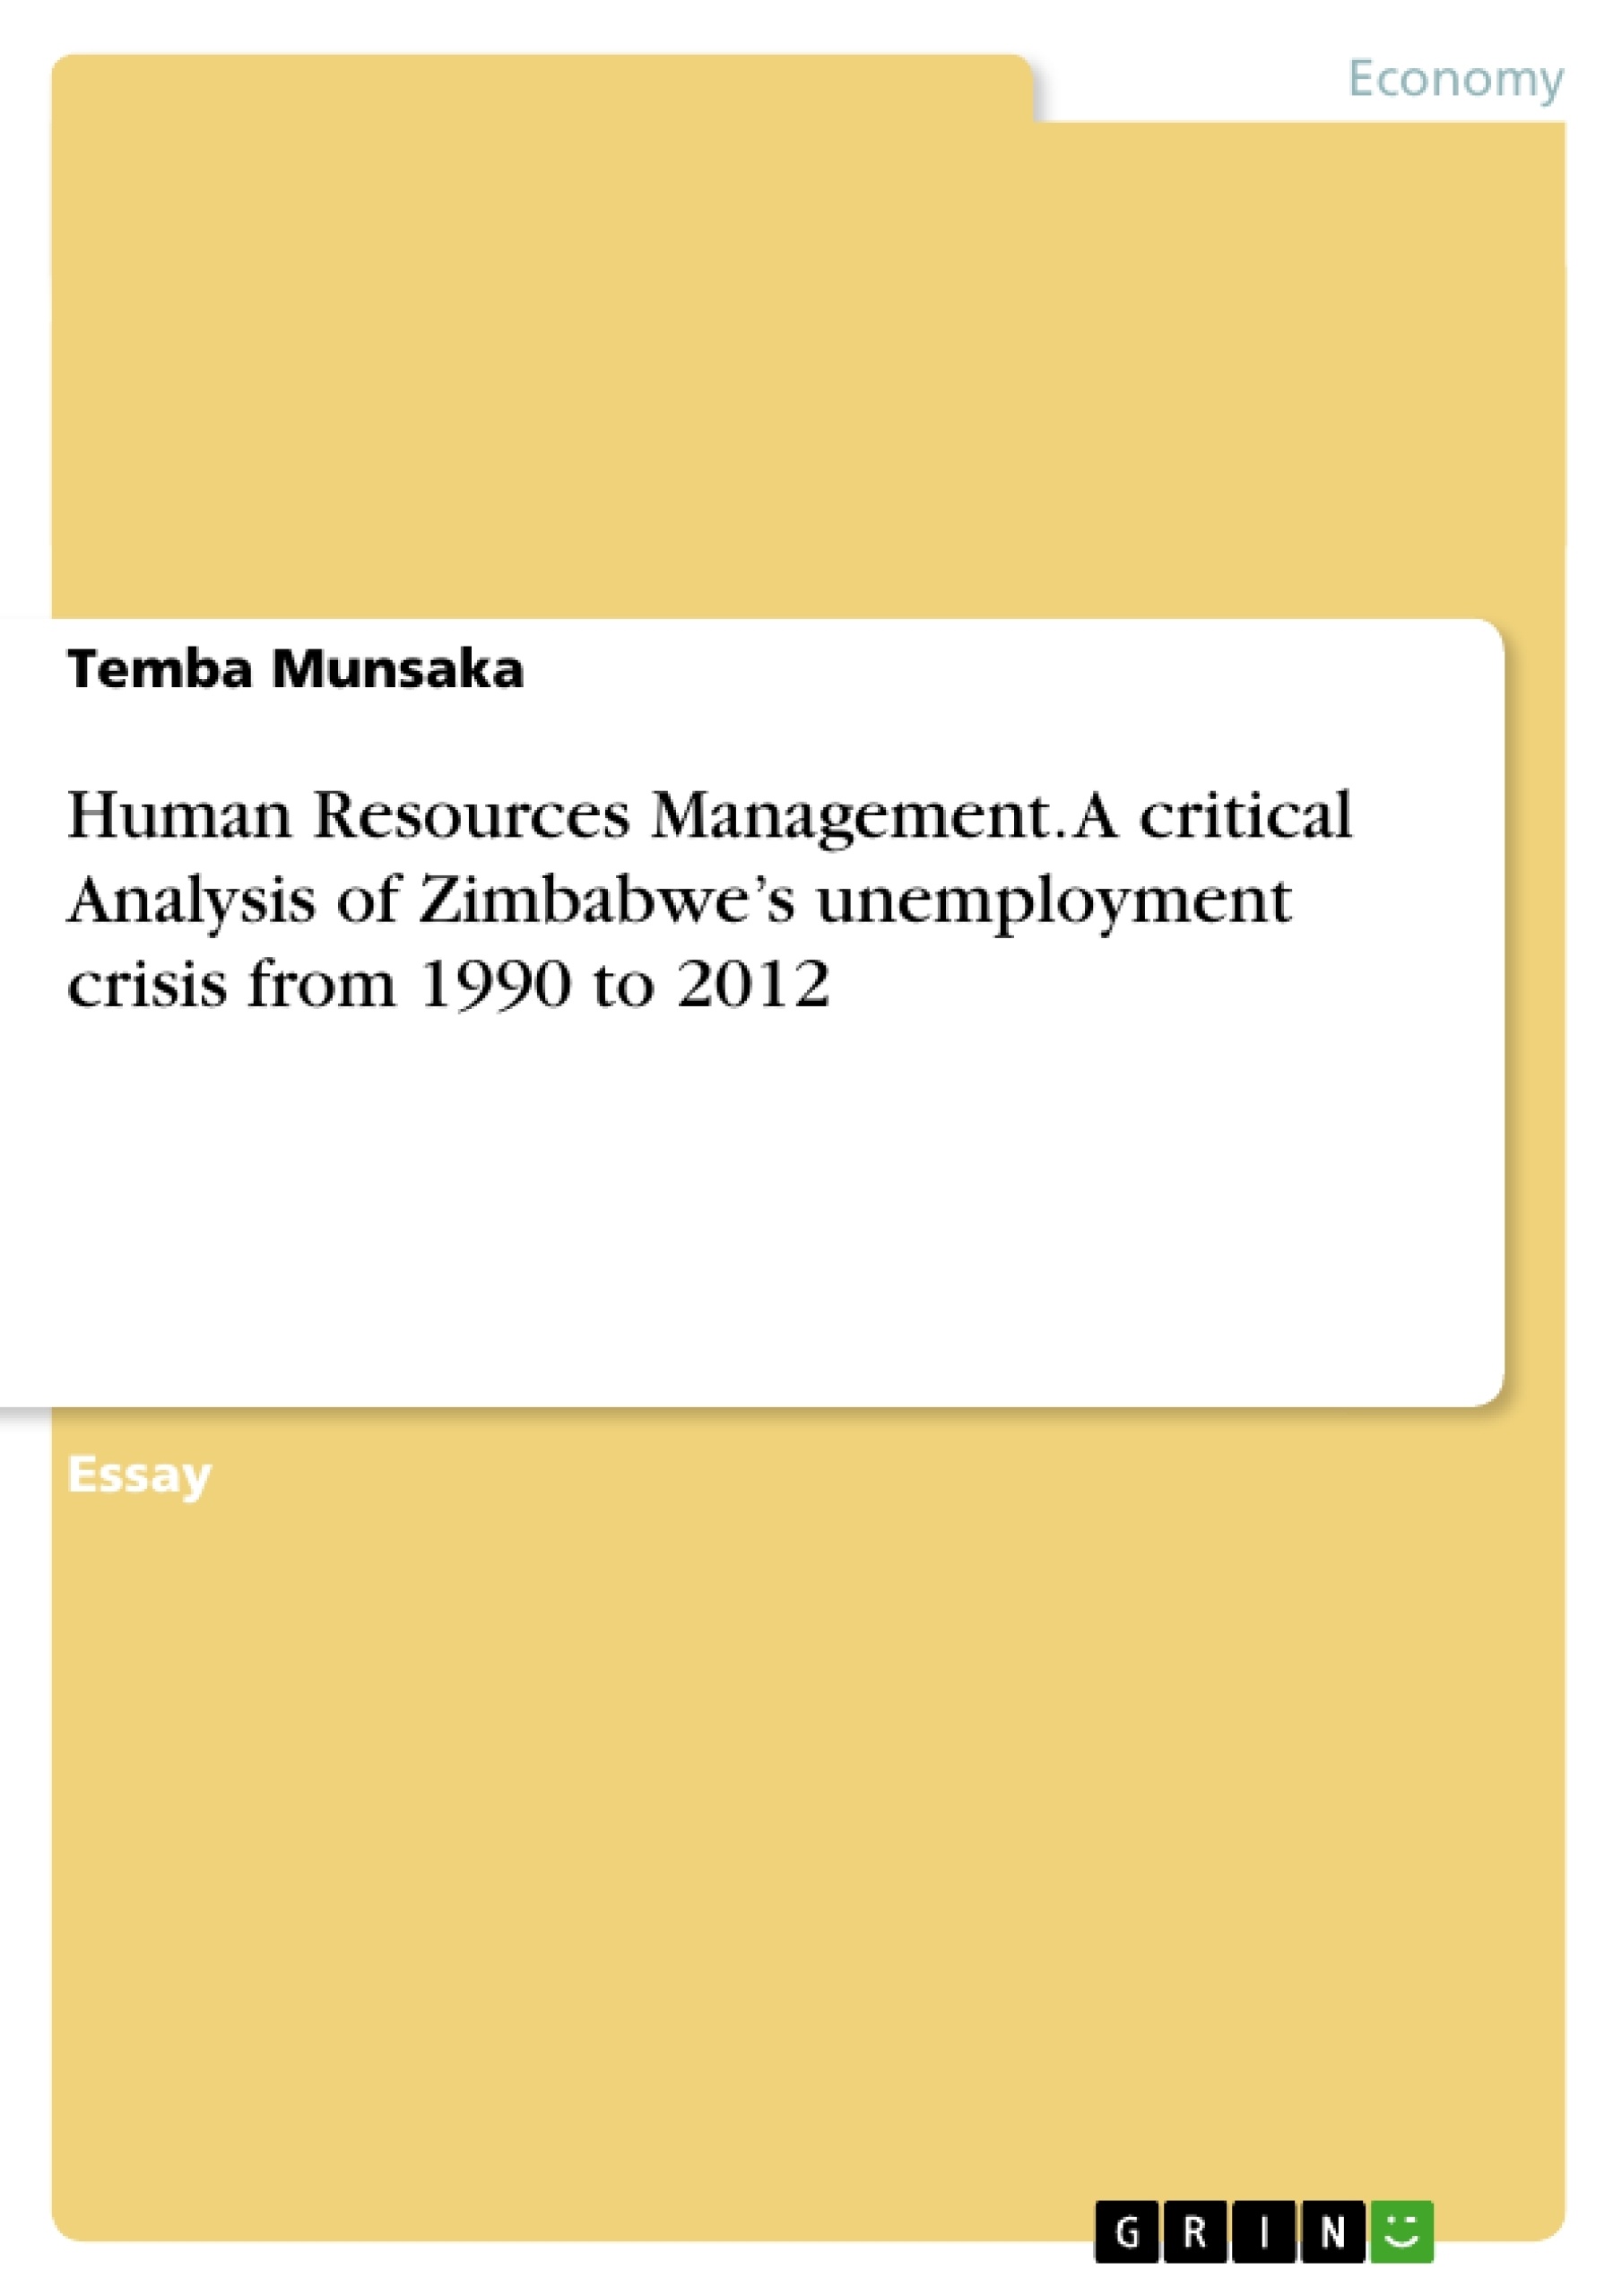 Title: Human Resources Management. A critical Analysis of Zimbabwe’s unemployment crisis from 1990 to 2012